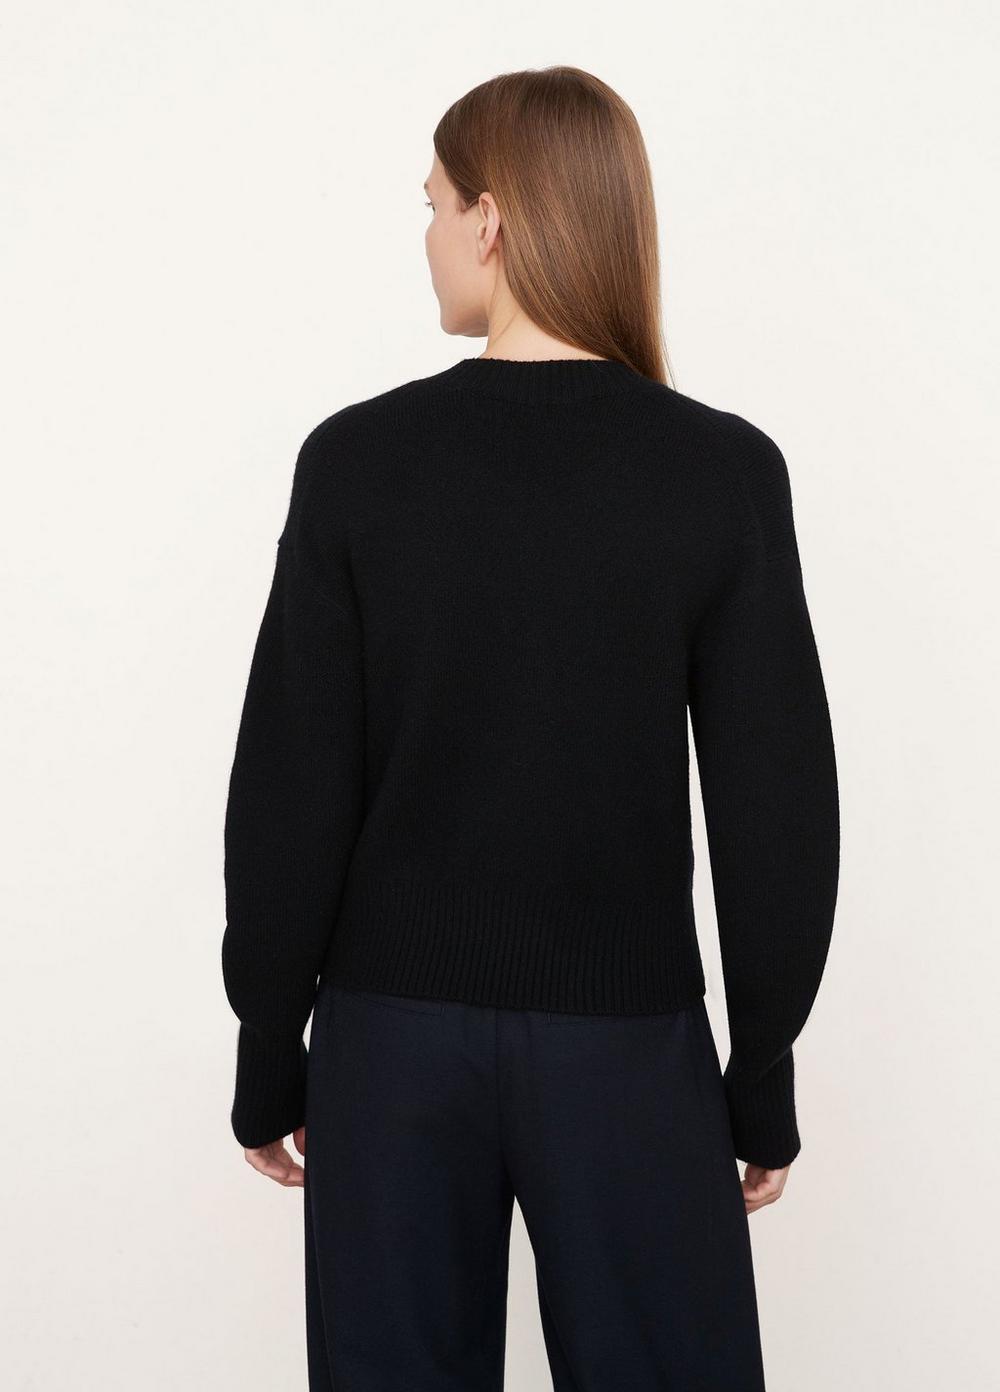 Vince | Wide Sleeve Crew Neck Sweater in Black | Vince Unfold